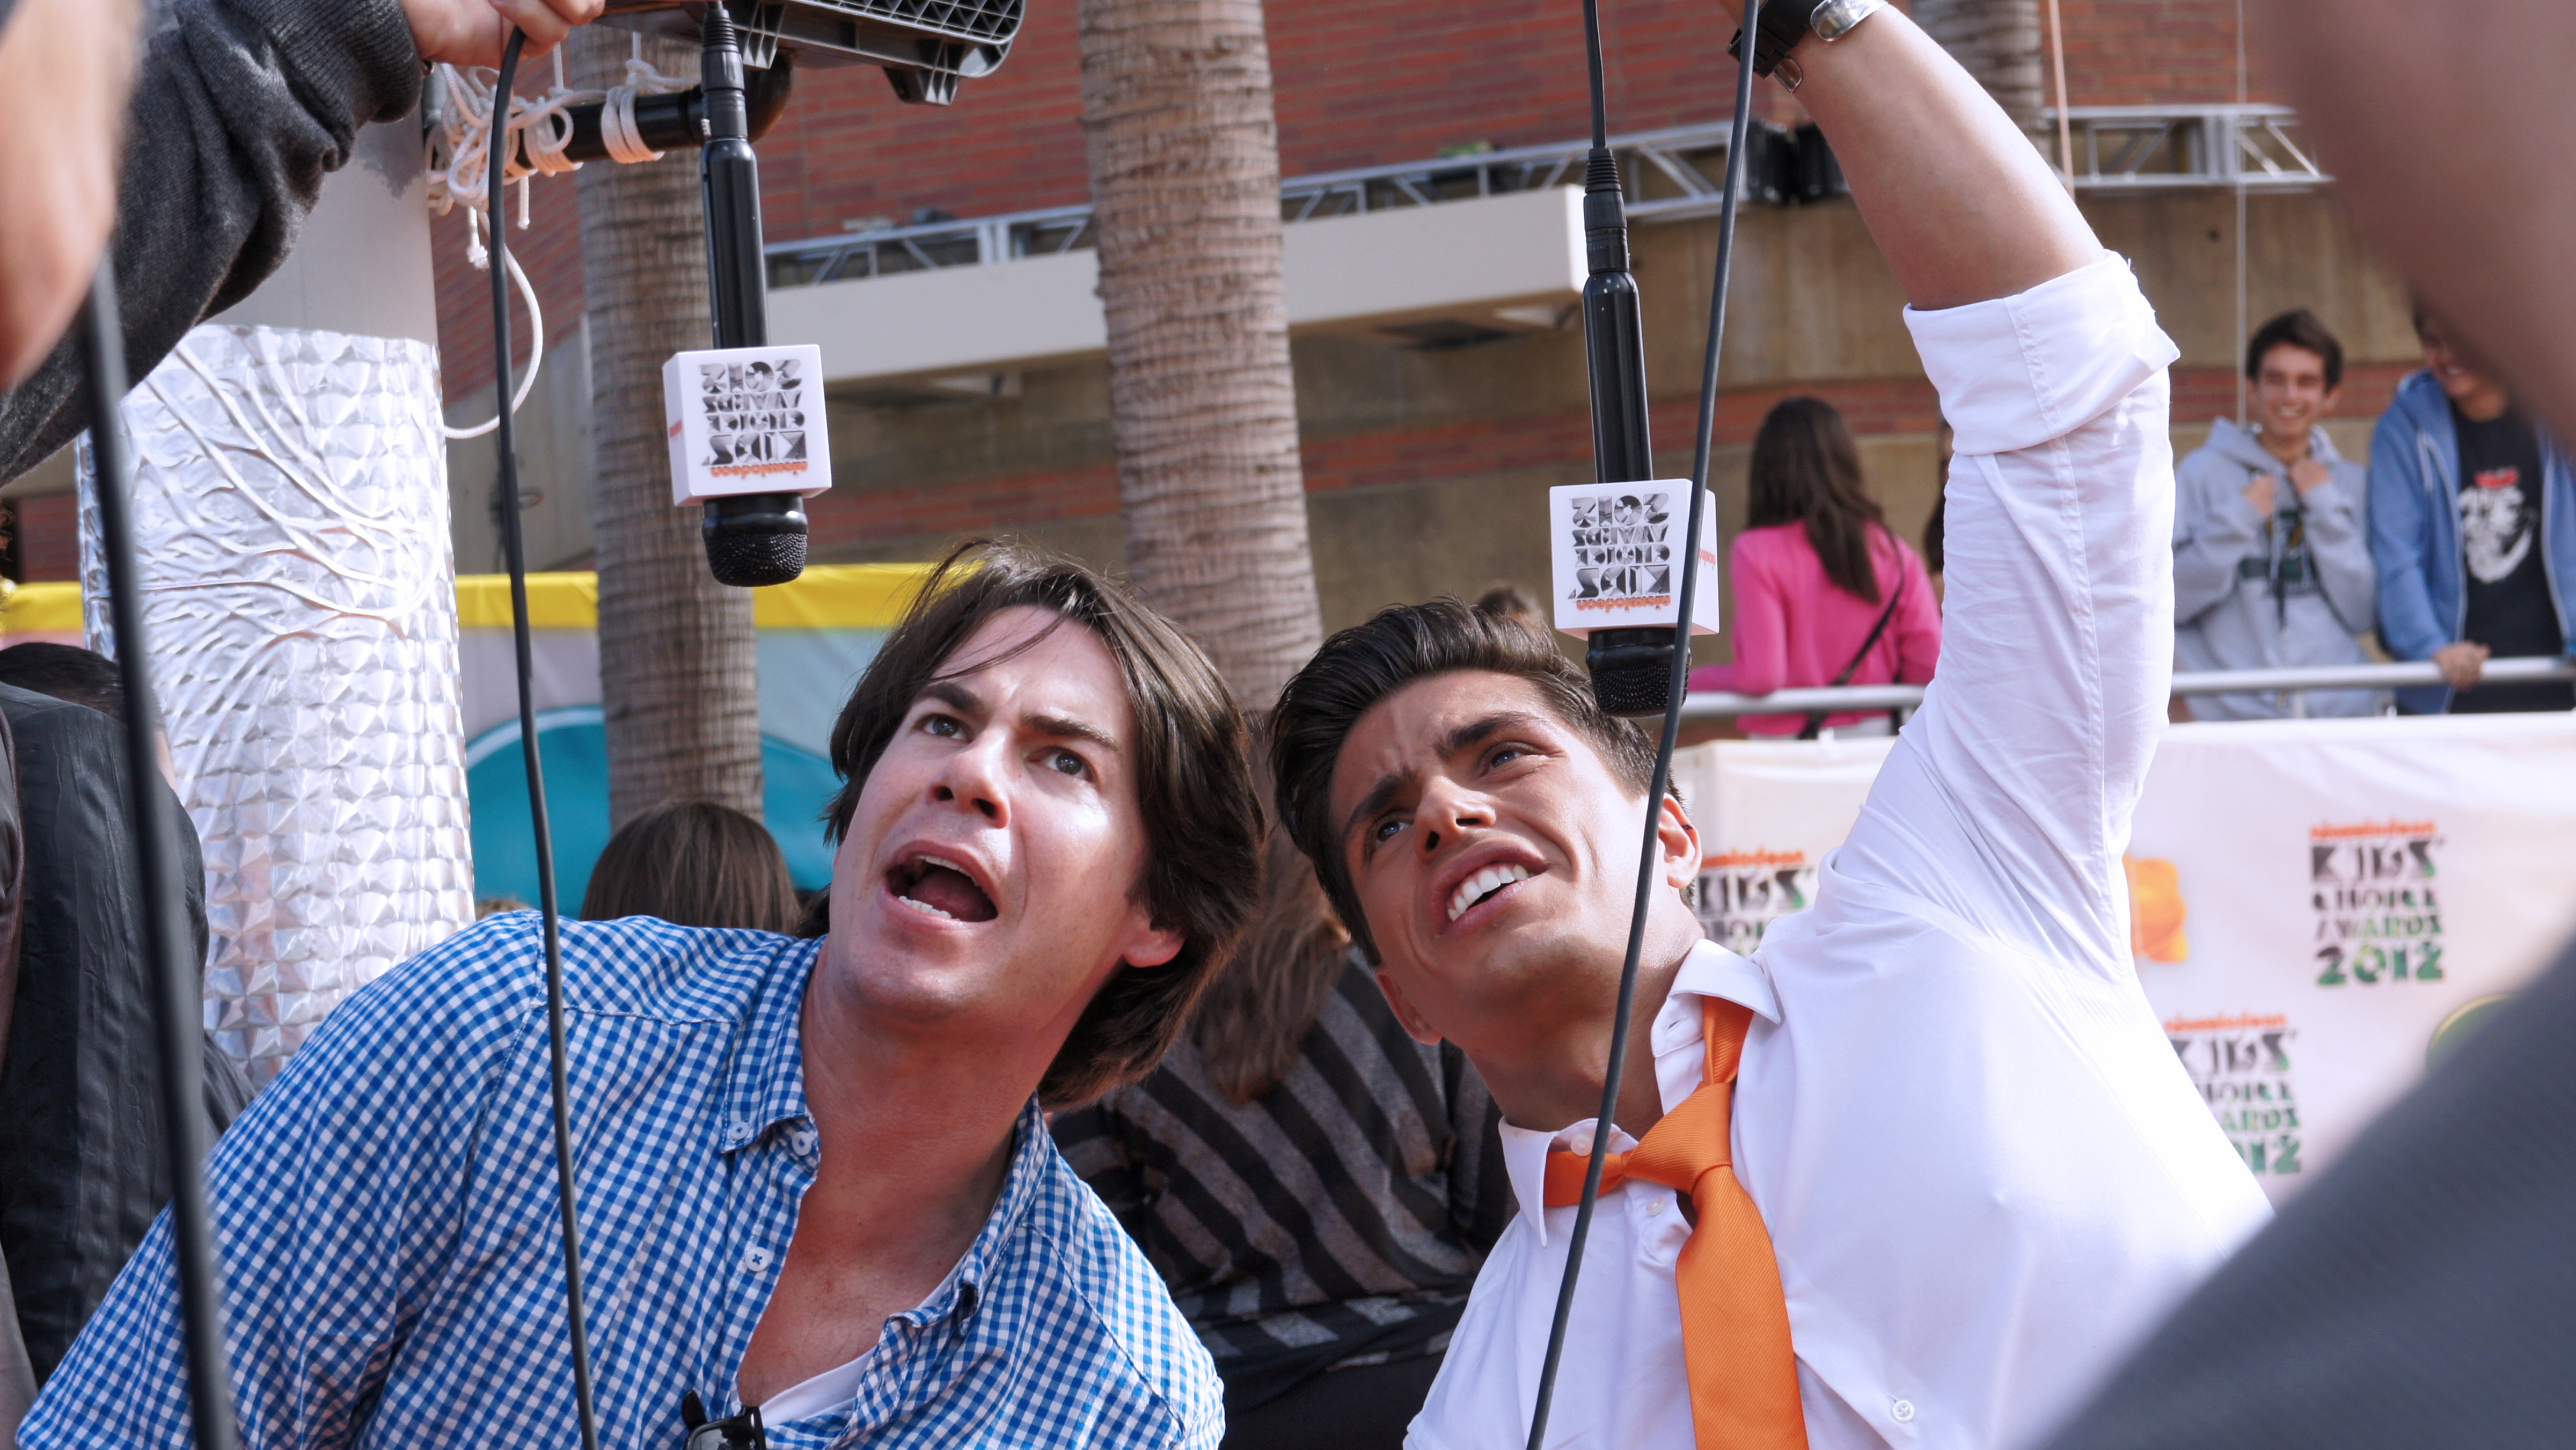 Hosting the pre-show of the Nickelodeon Kids Choice Awards 2012. (W/Jerry Trainor).